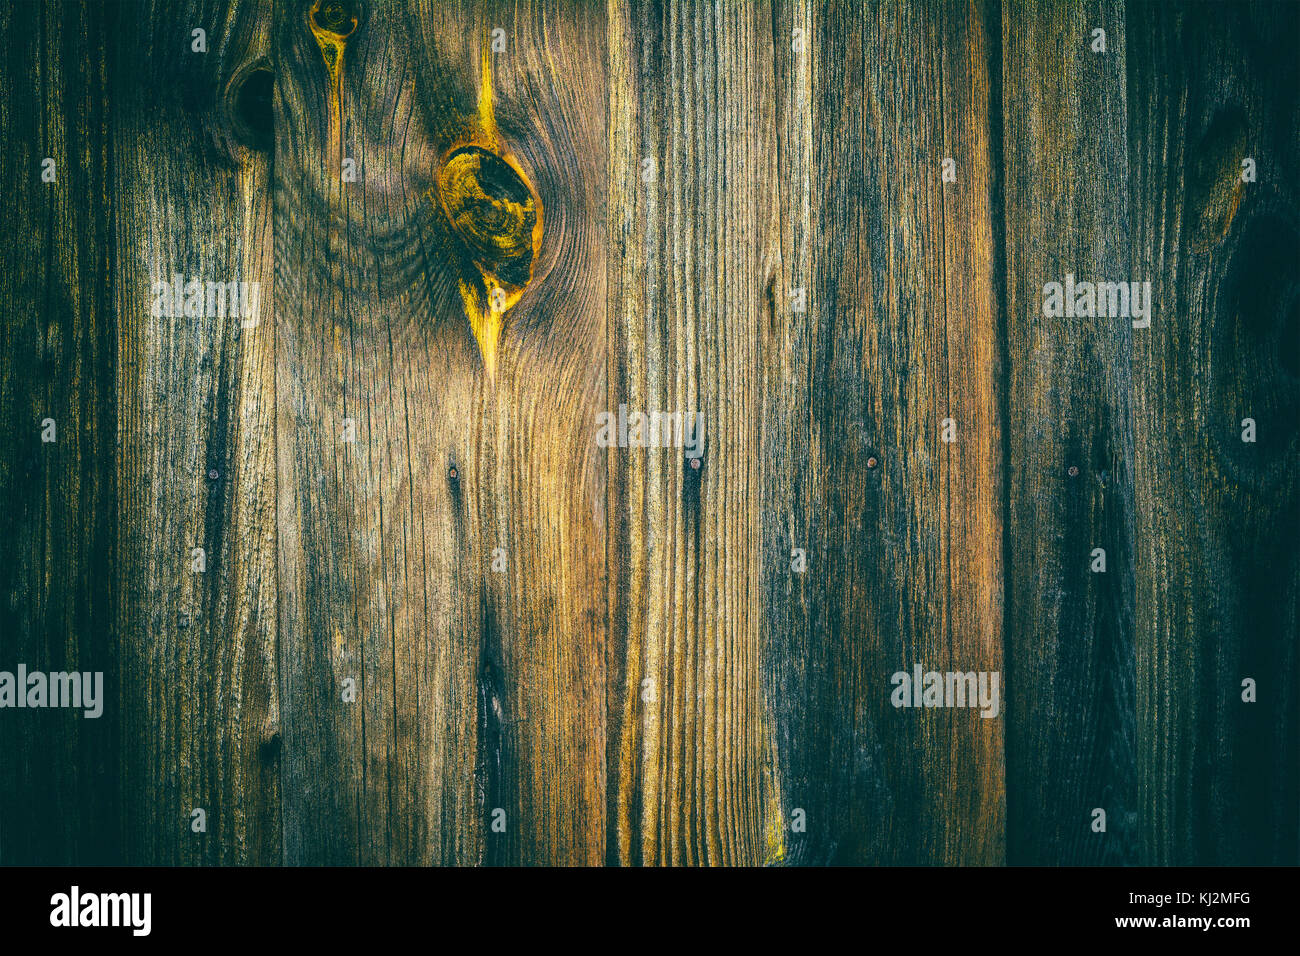 Dark grunge texture with vertical stripes of old boards. Background from wooden faded planks with decorative yellow knot. Stock Photo